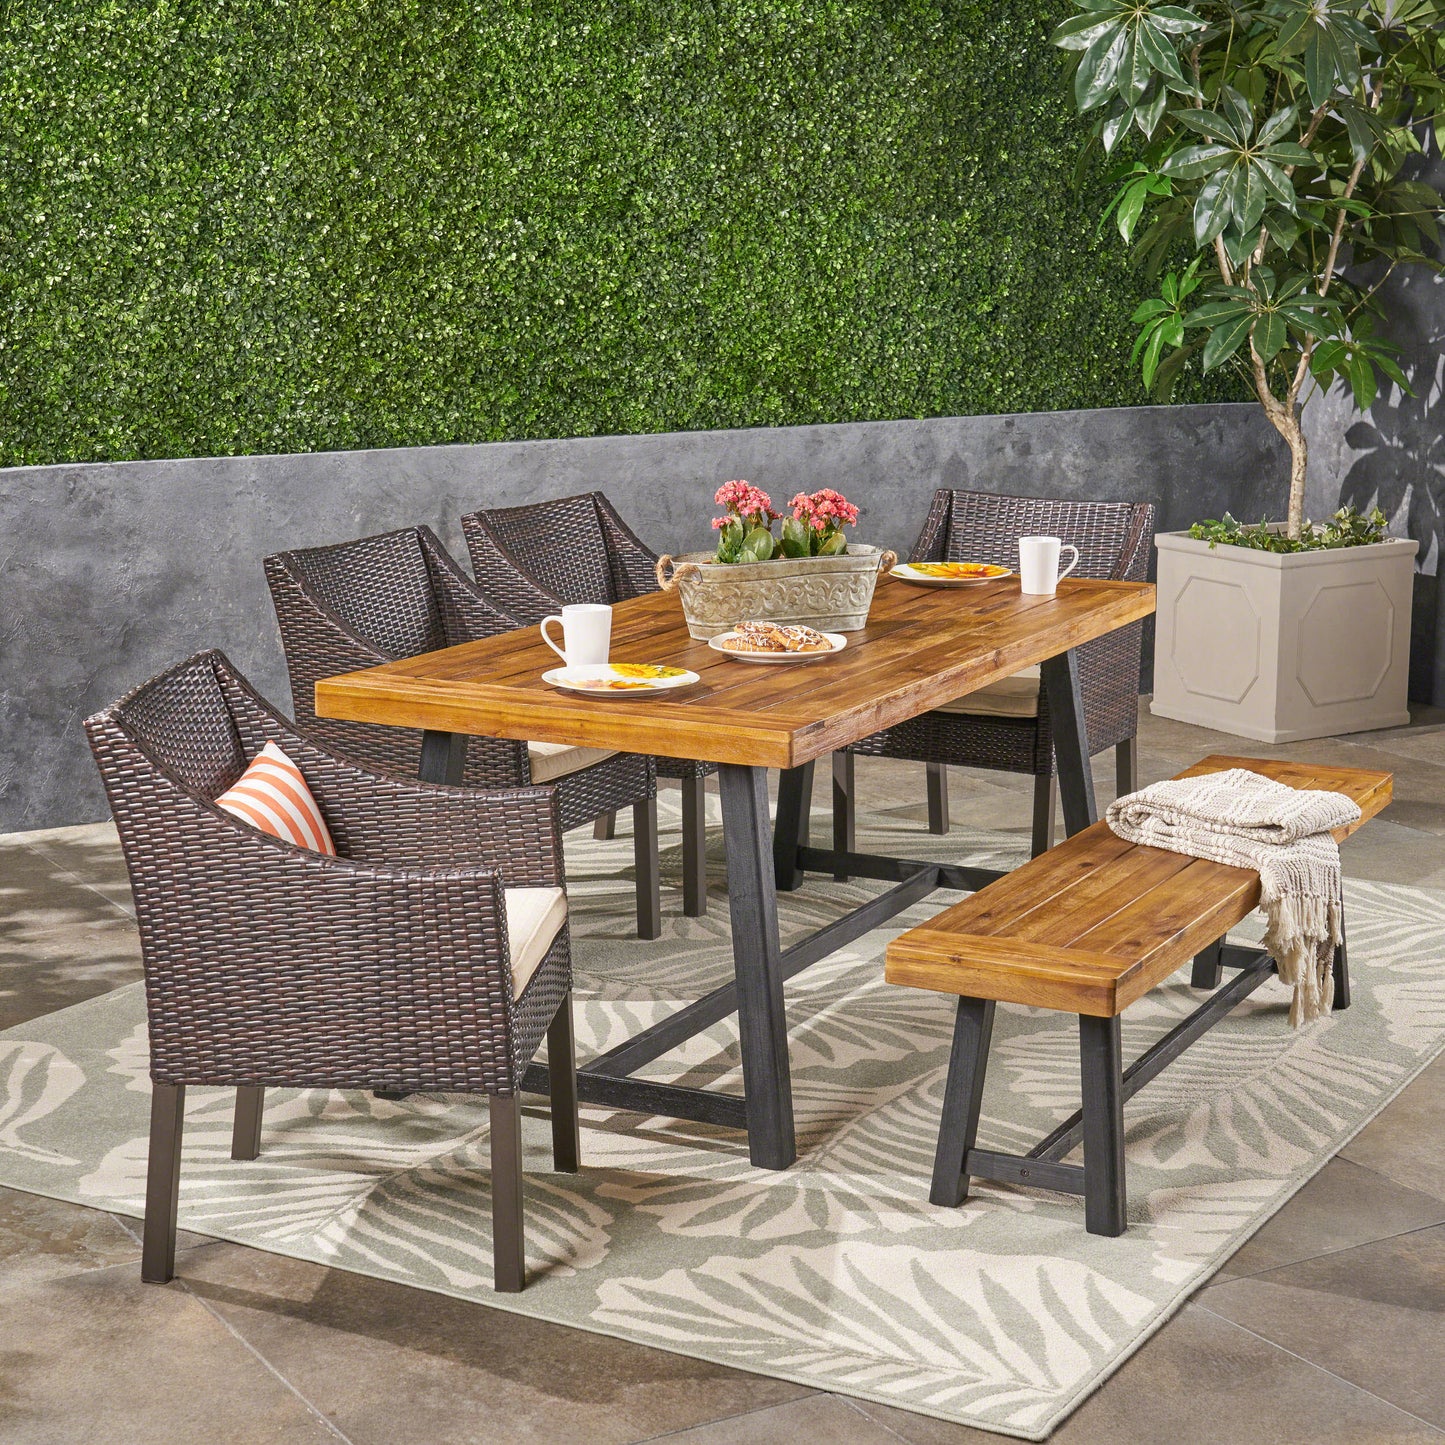 Kane Outdoor 6 Piece Dining Set with Wicker Chairs and Bench, Sandblast Teak and Multi Brown and Beige